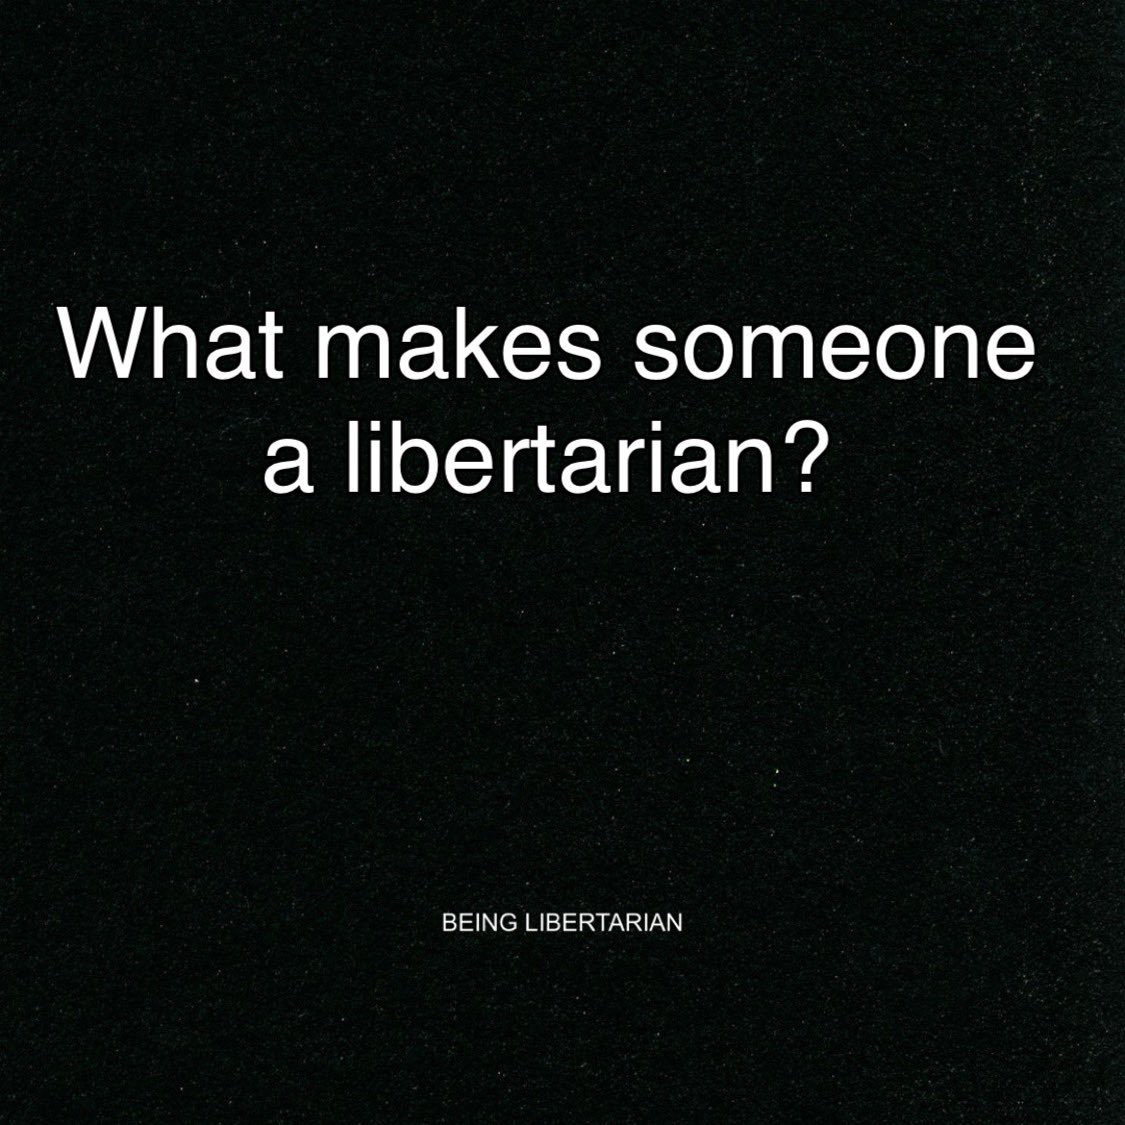 What are the bare minimum qualifications to be able to claim one is a libertarian?